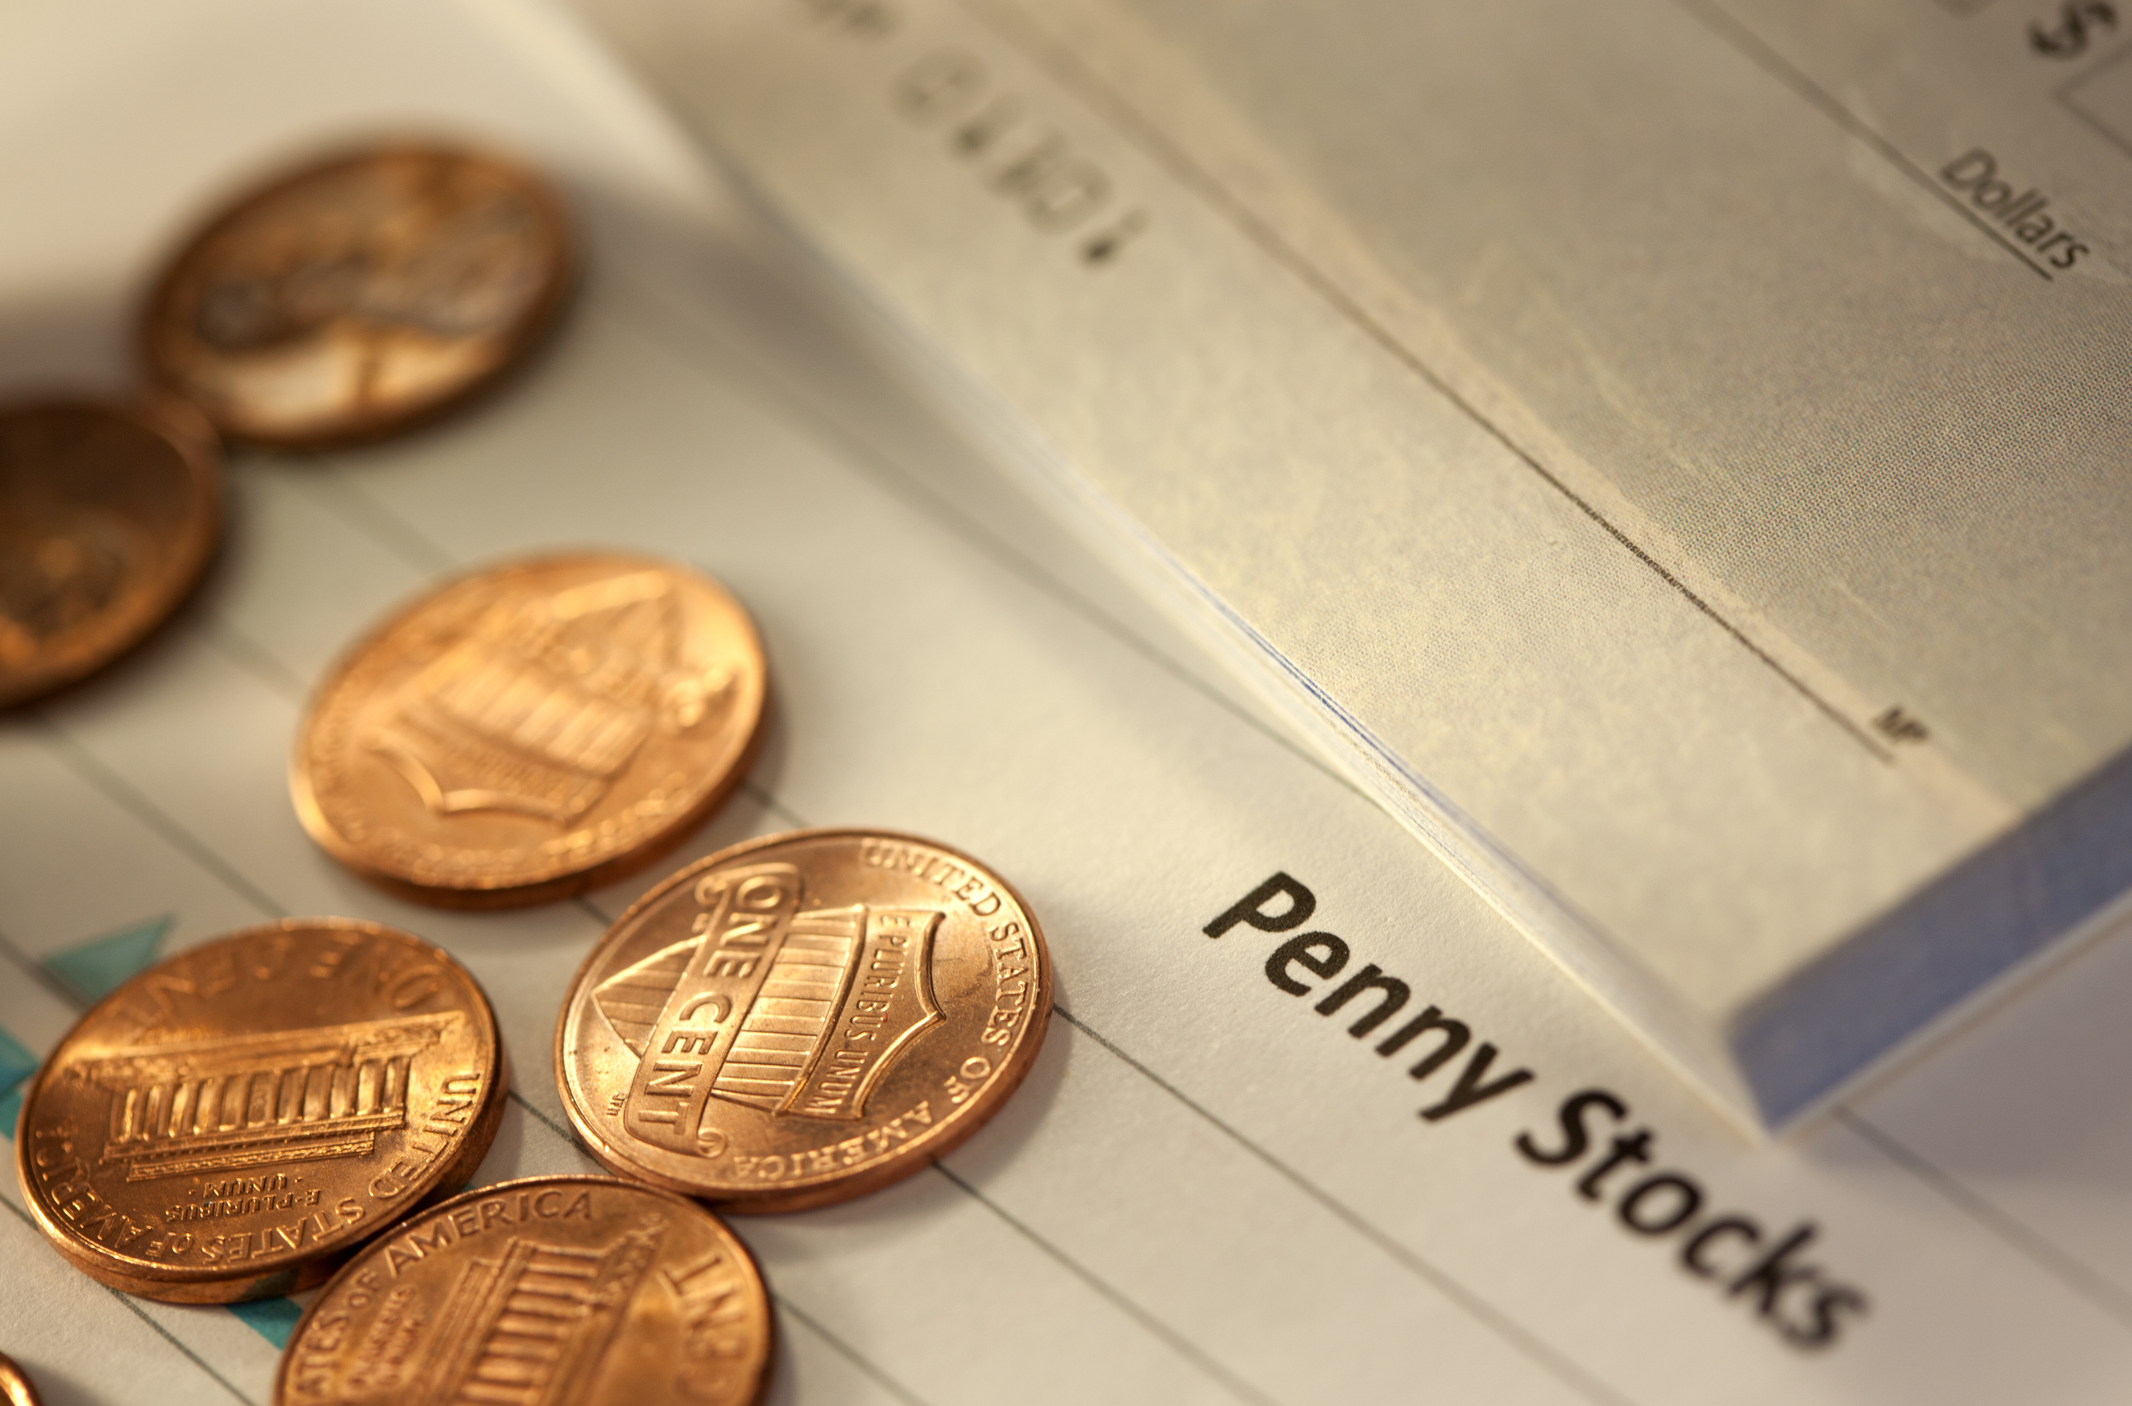 Penny Stock Alerts